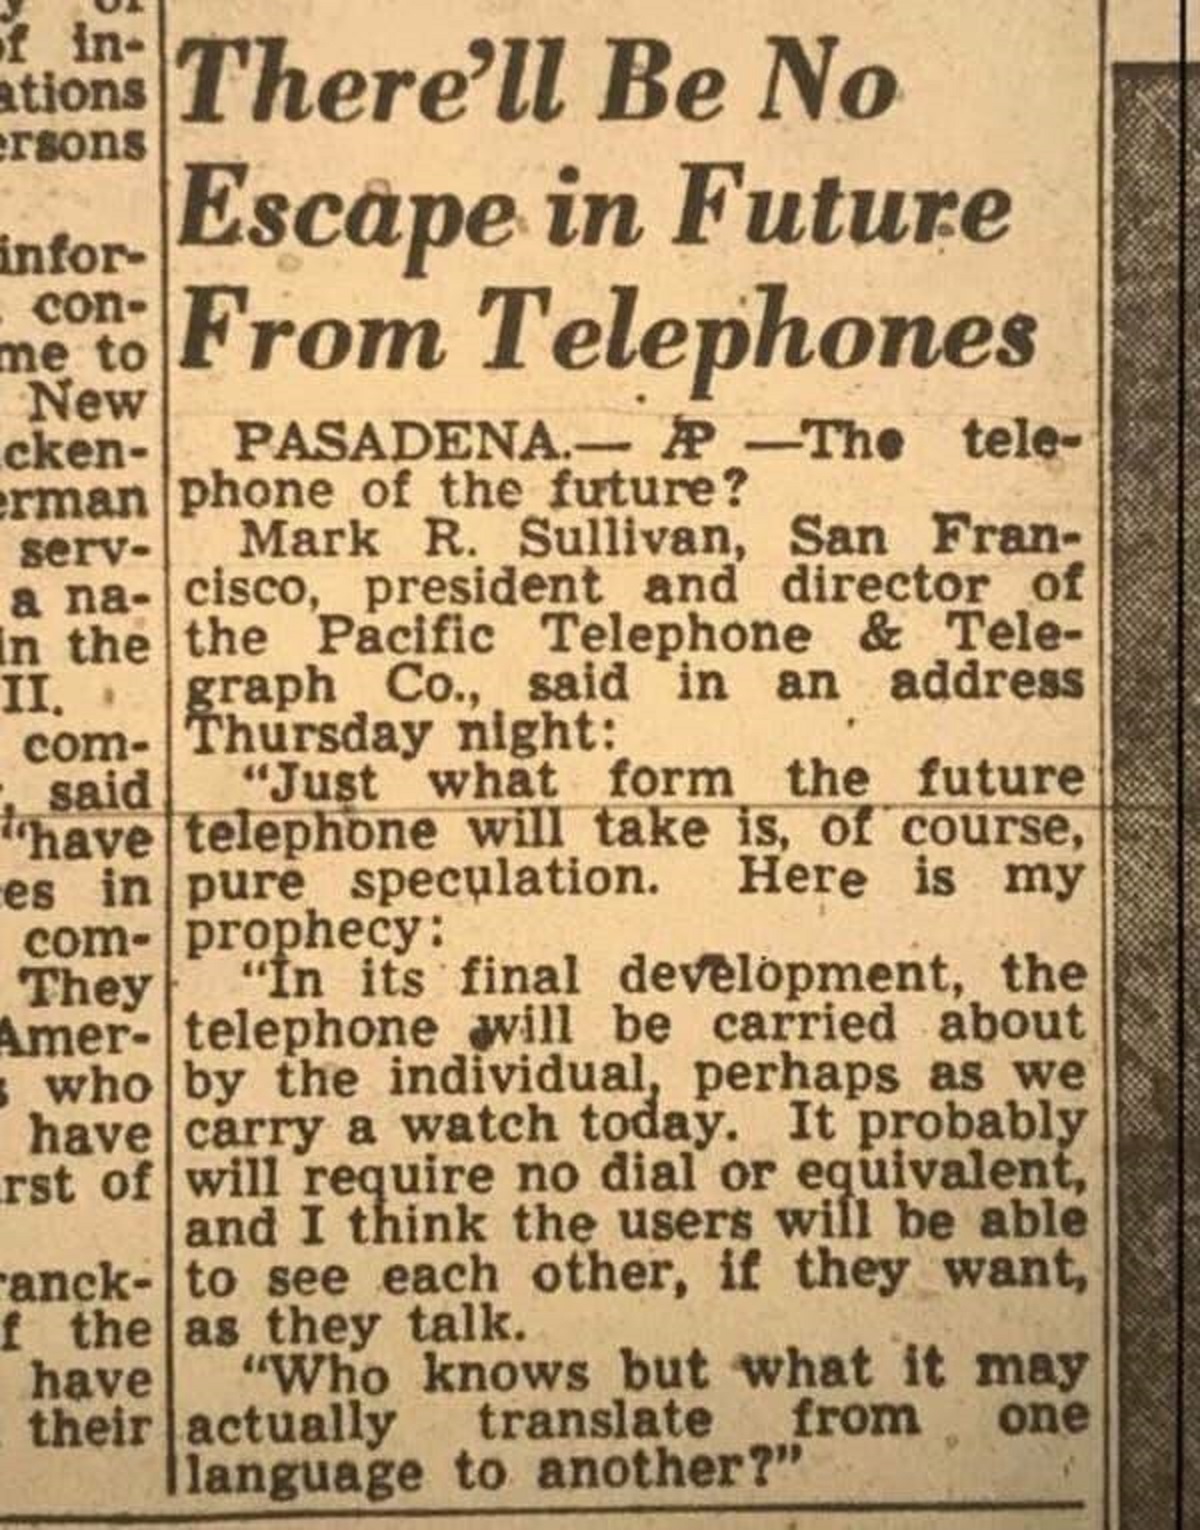 Finally, we'll end on two that were eerily prescient — this newspaper article from 1953...